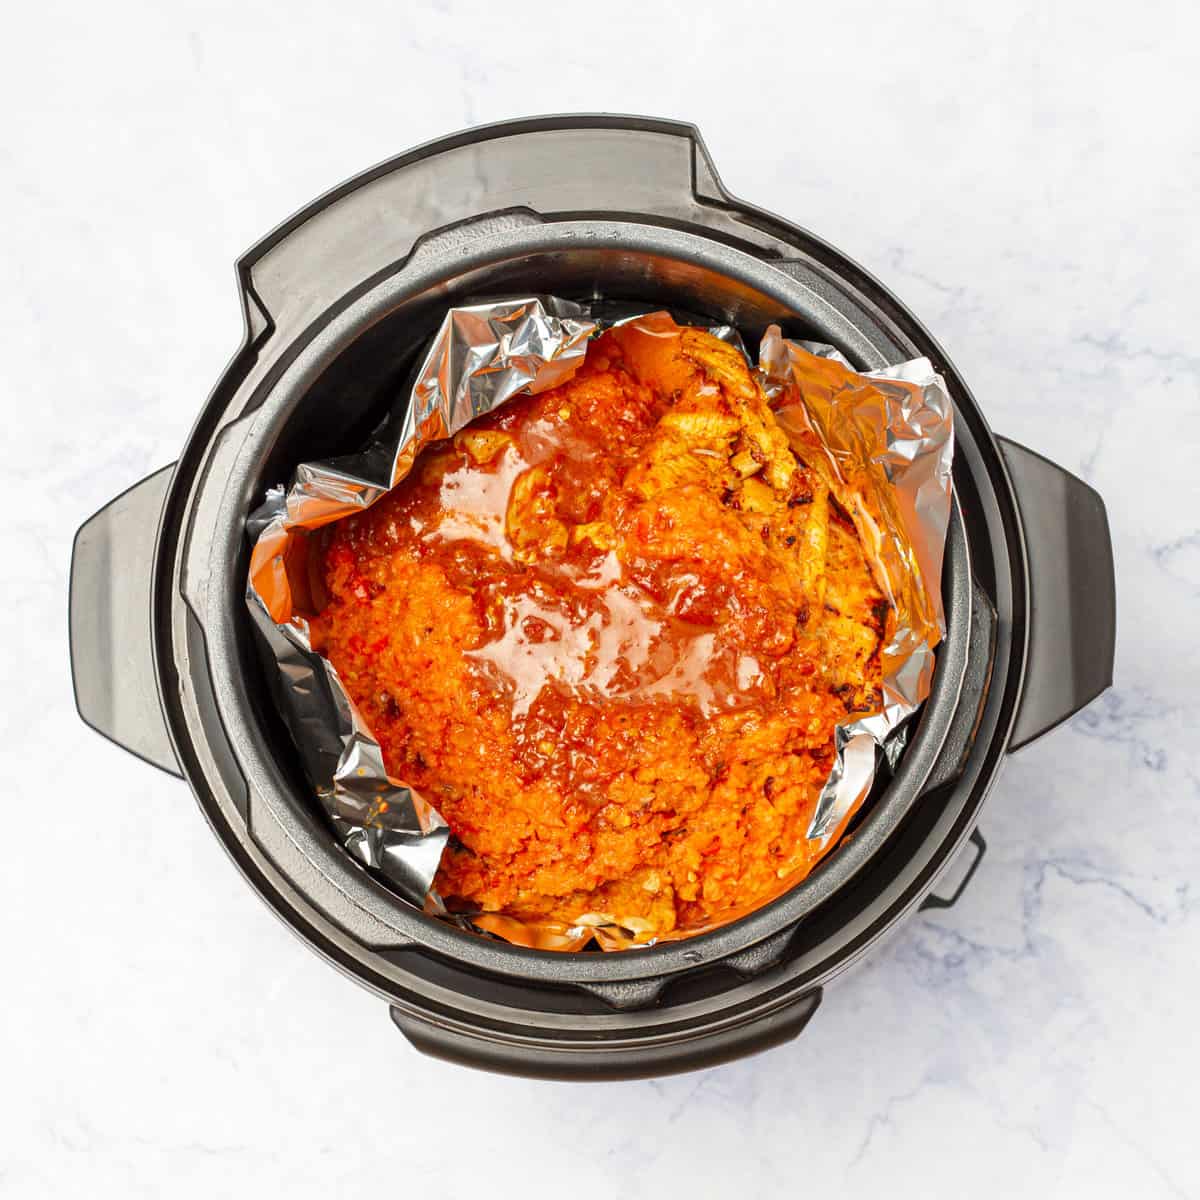 sautéed chicken breast fillets on the foil placed in instant pot